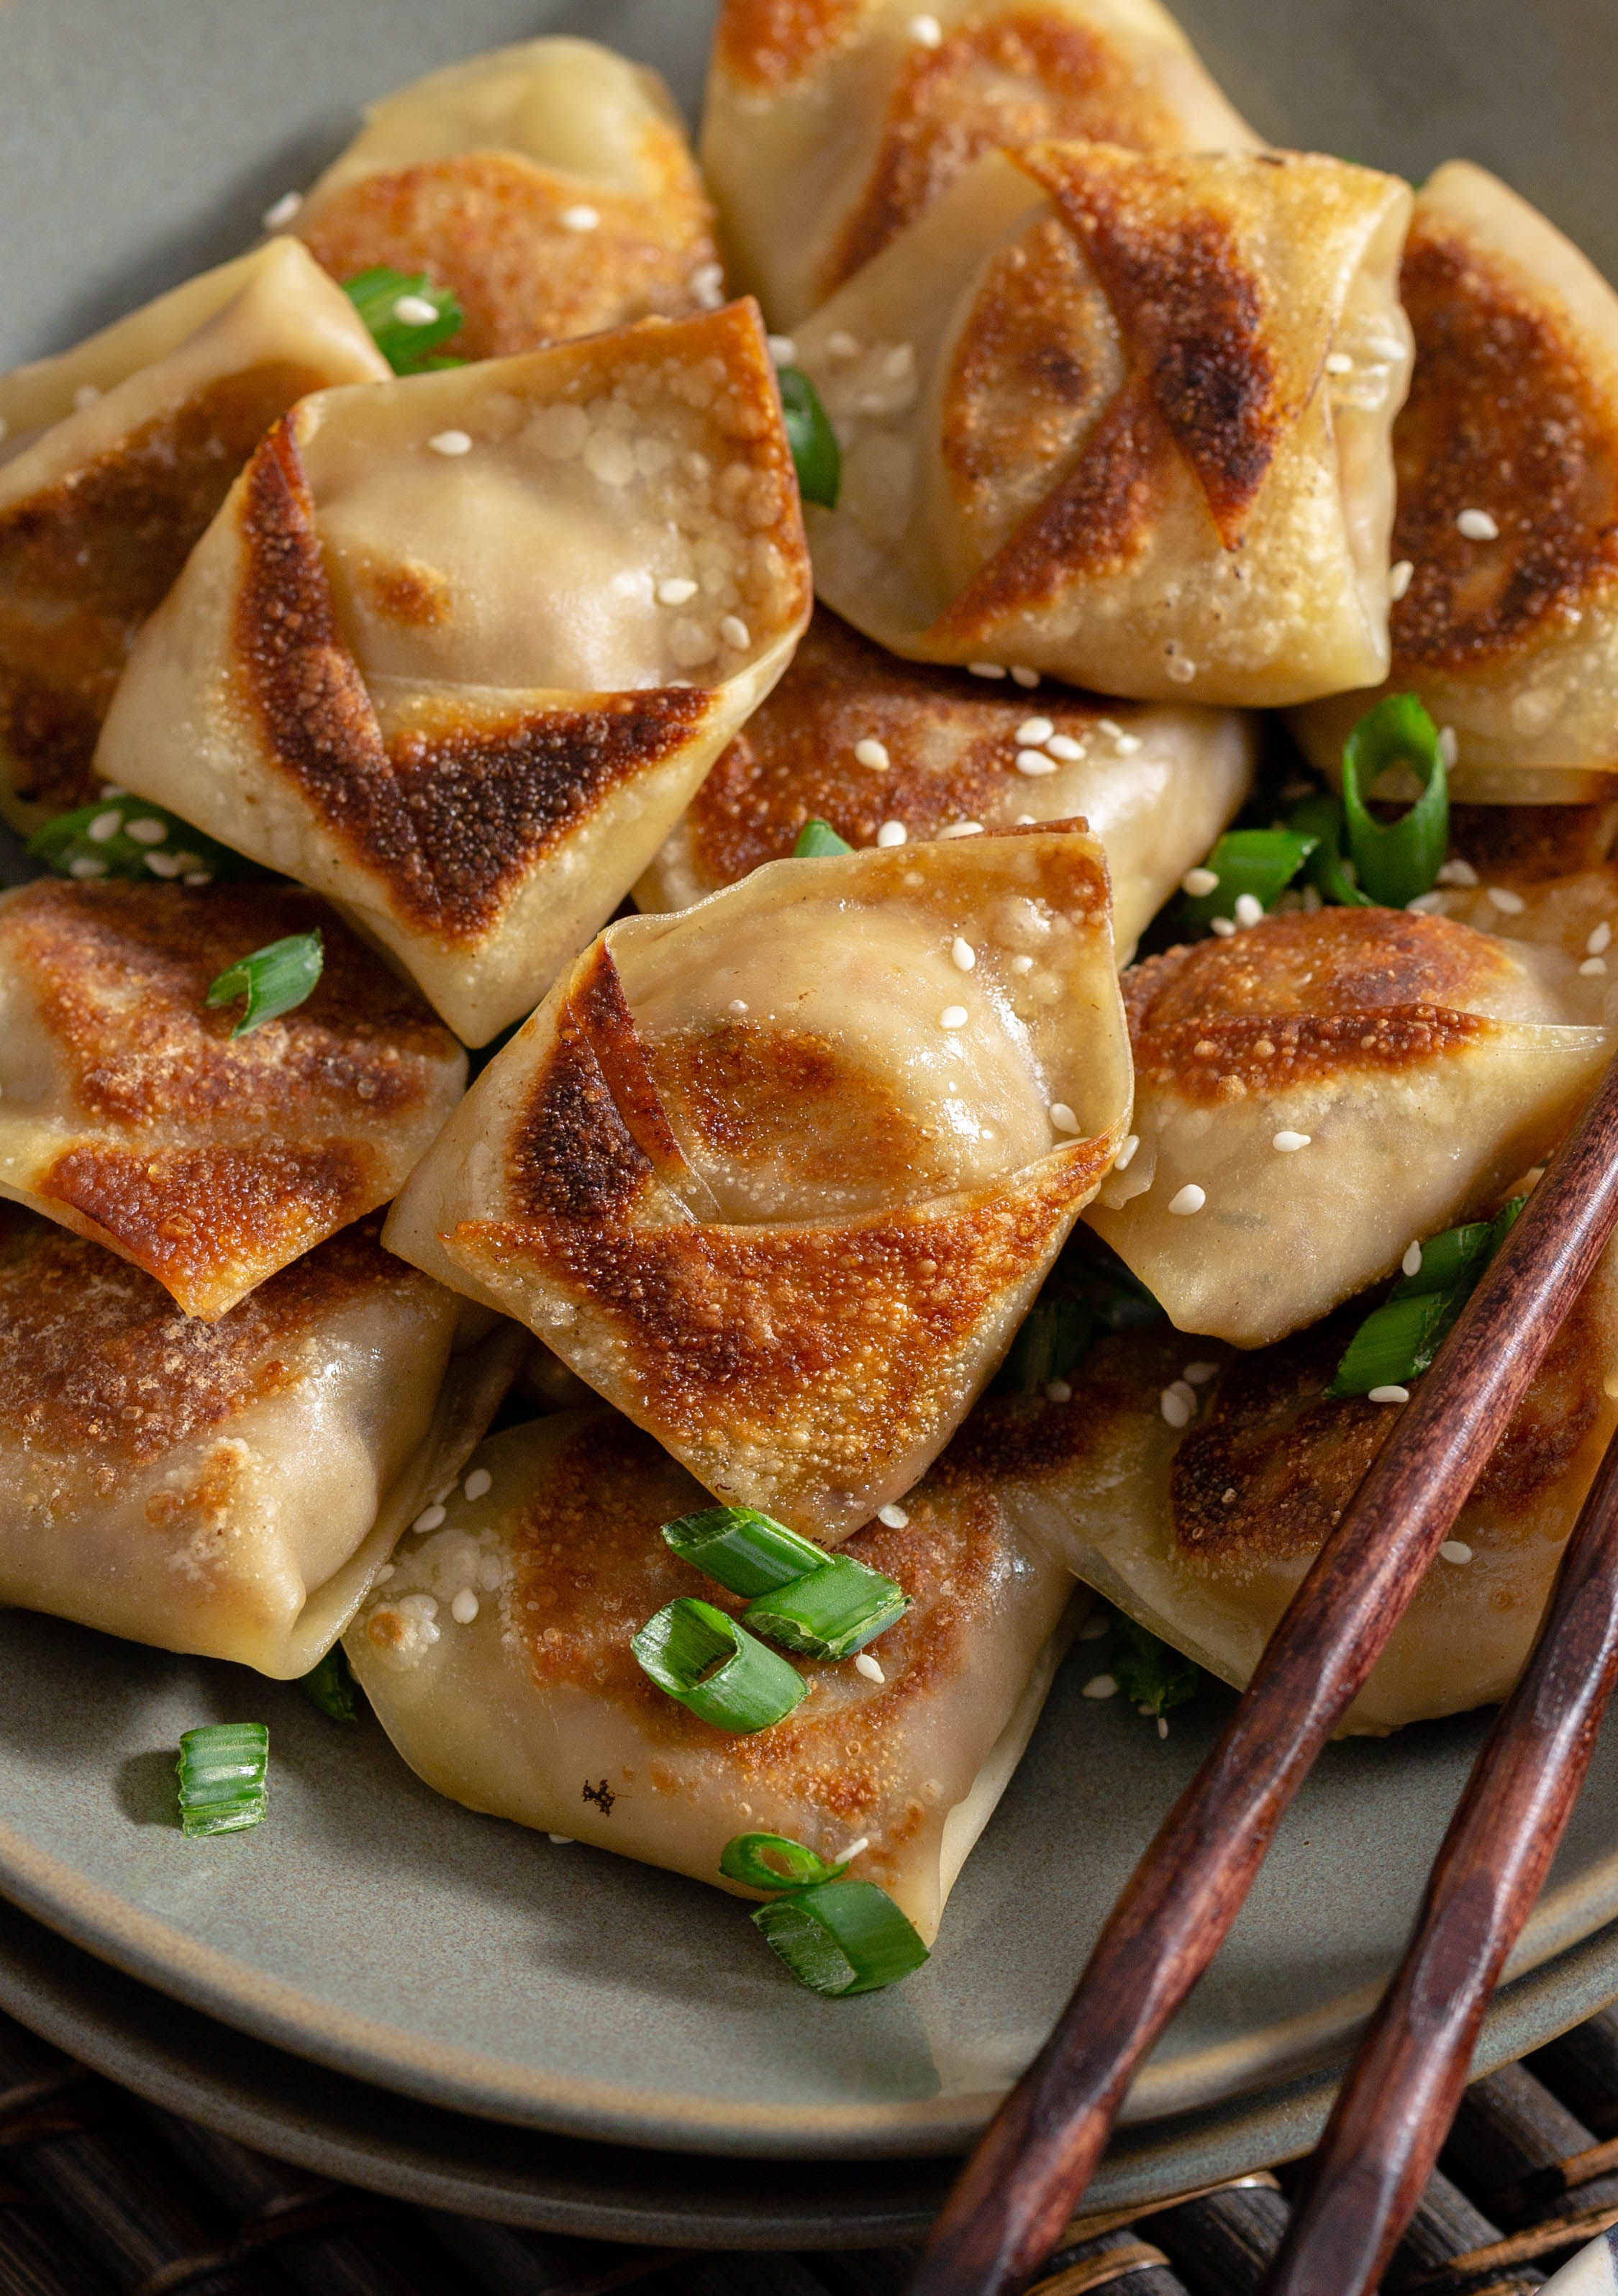 You're a fan of Asian takeout, but you're trying to only eat quality ingredients, right? Skip the pricy restaurant takeout and make these budget-friendly Fried Pork Wontons at home. These Chinese Dumplings are great as an appetizer or to compliment your stir fry.